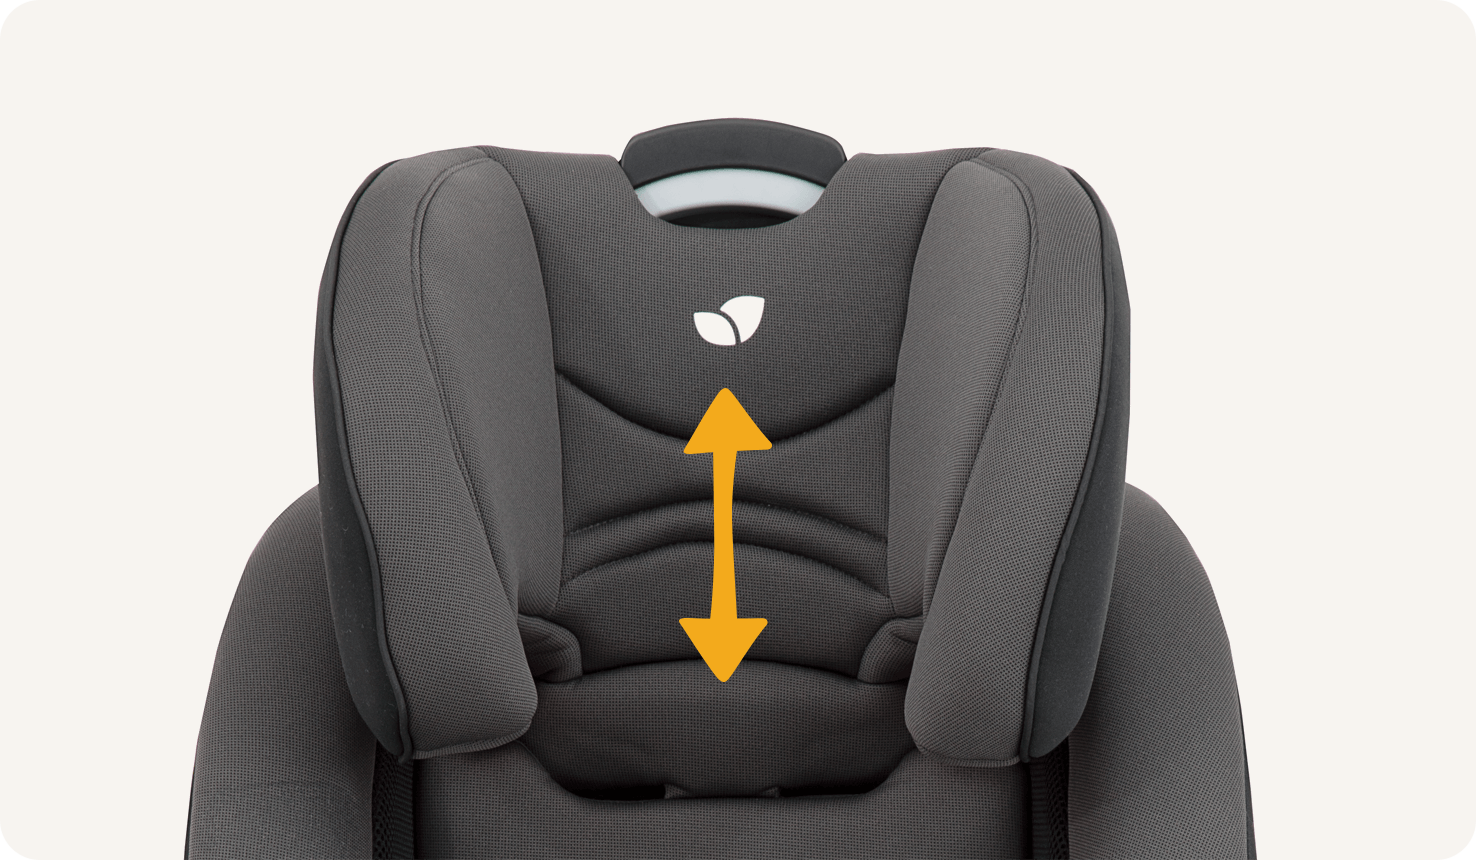  Zoomed in view of the headrest of a Joie verso booster car seat with an orange arrow showing the different headrest positions.